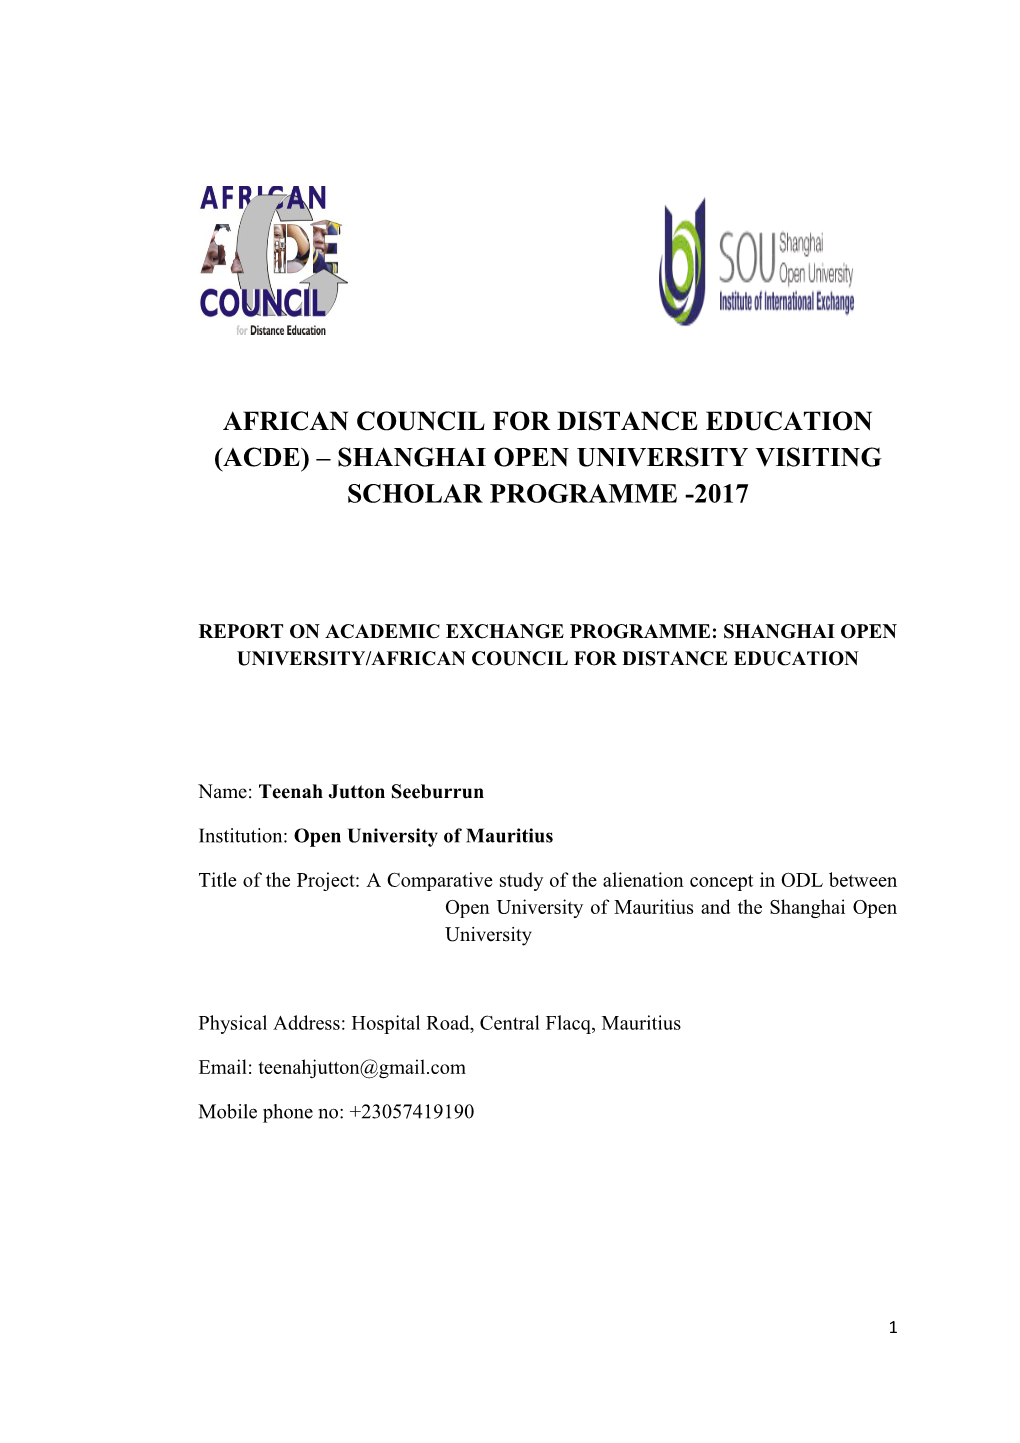 African Council for Distance Education (Acde) Shanghai Open University Visiting Scholar